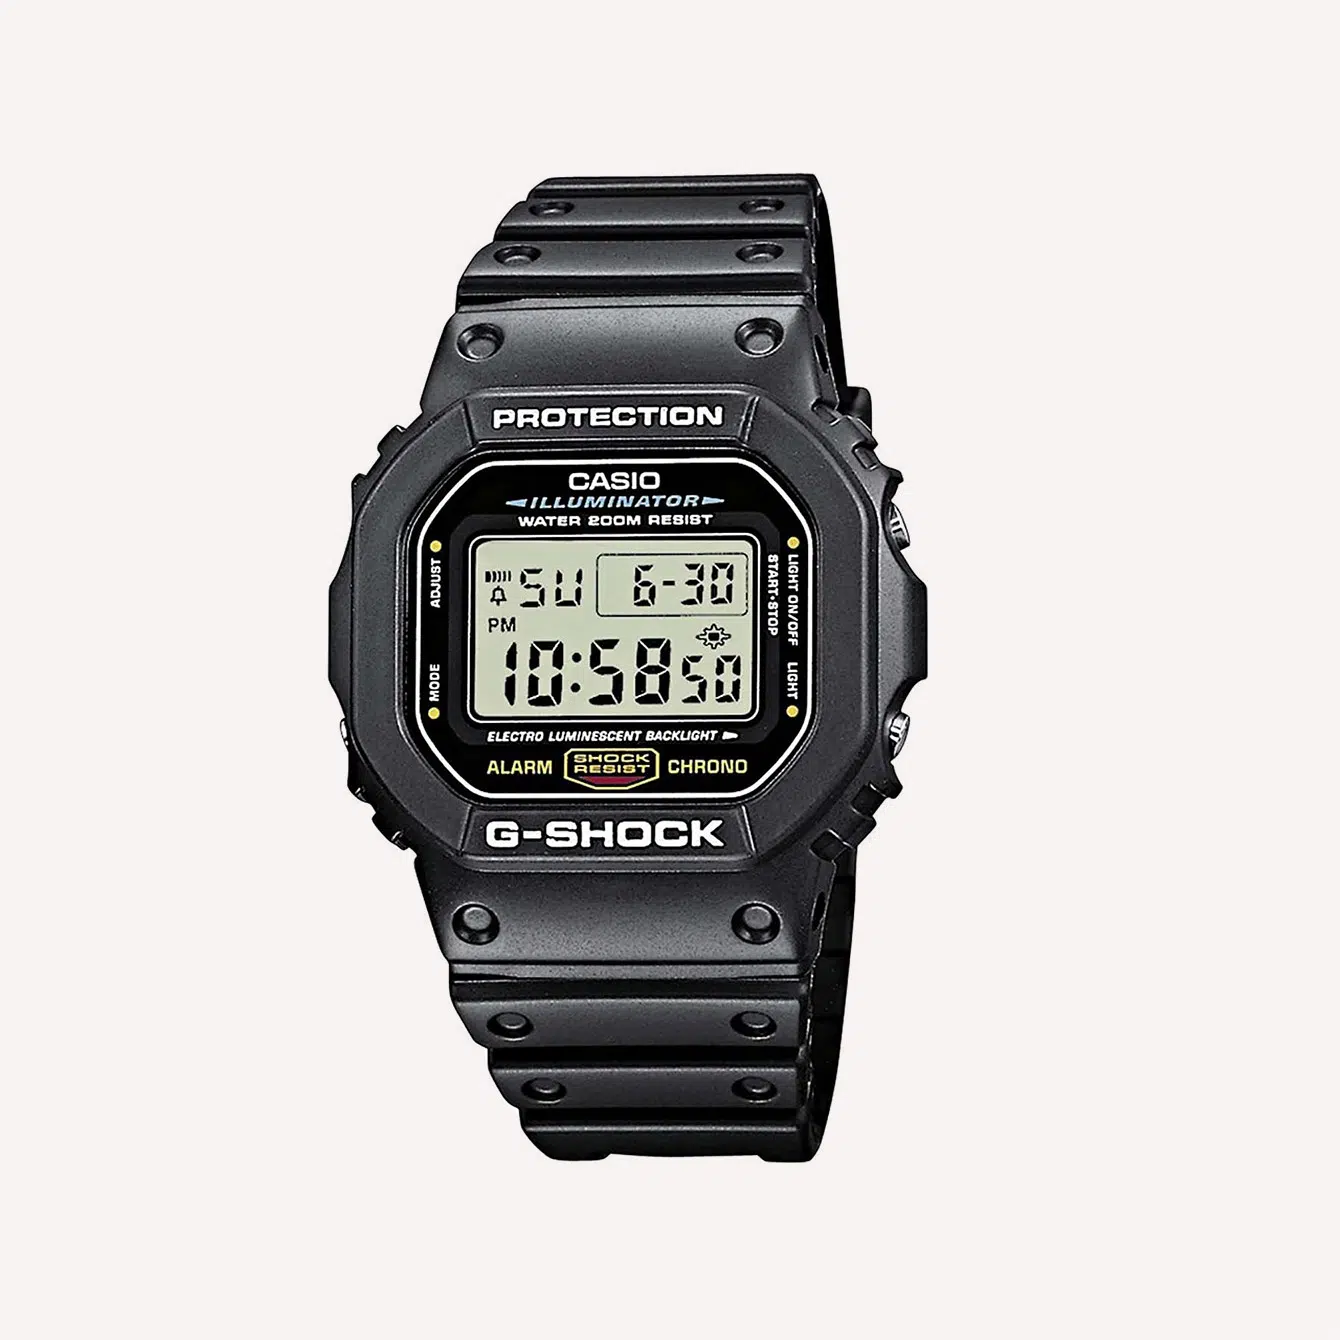 The Casio Watches for Small Wrists • The Slender Wrist